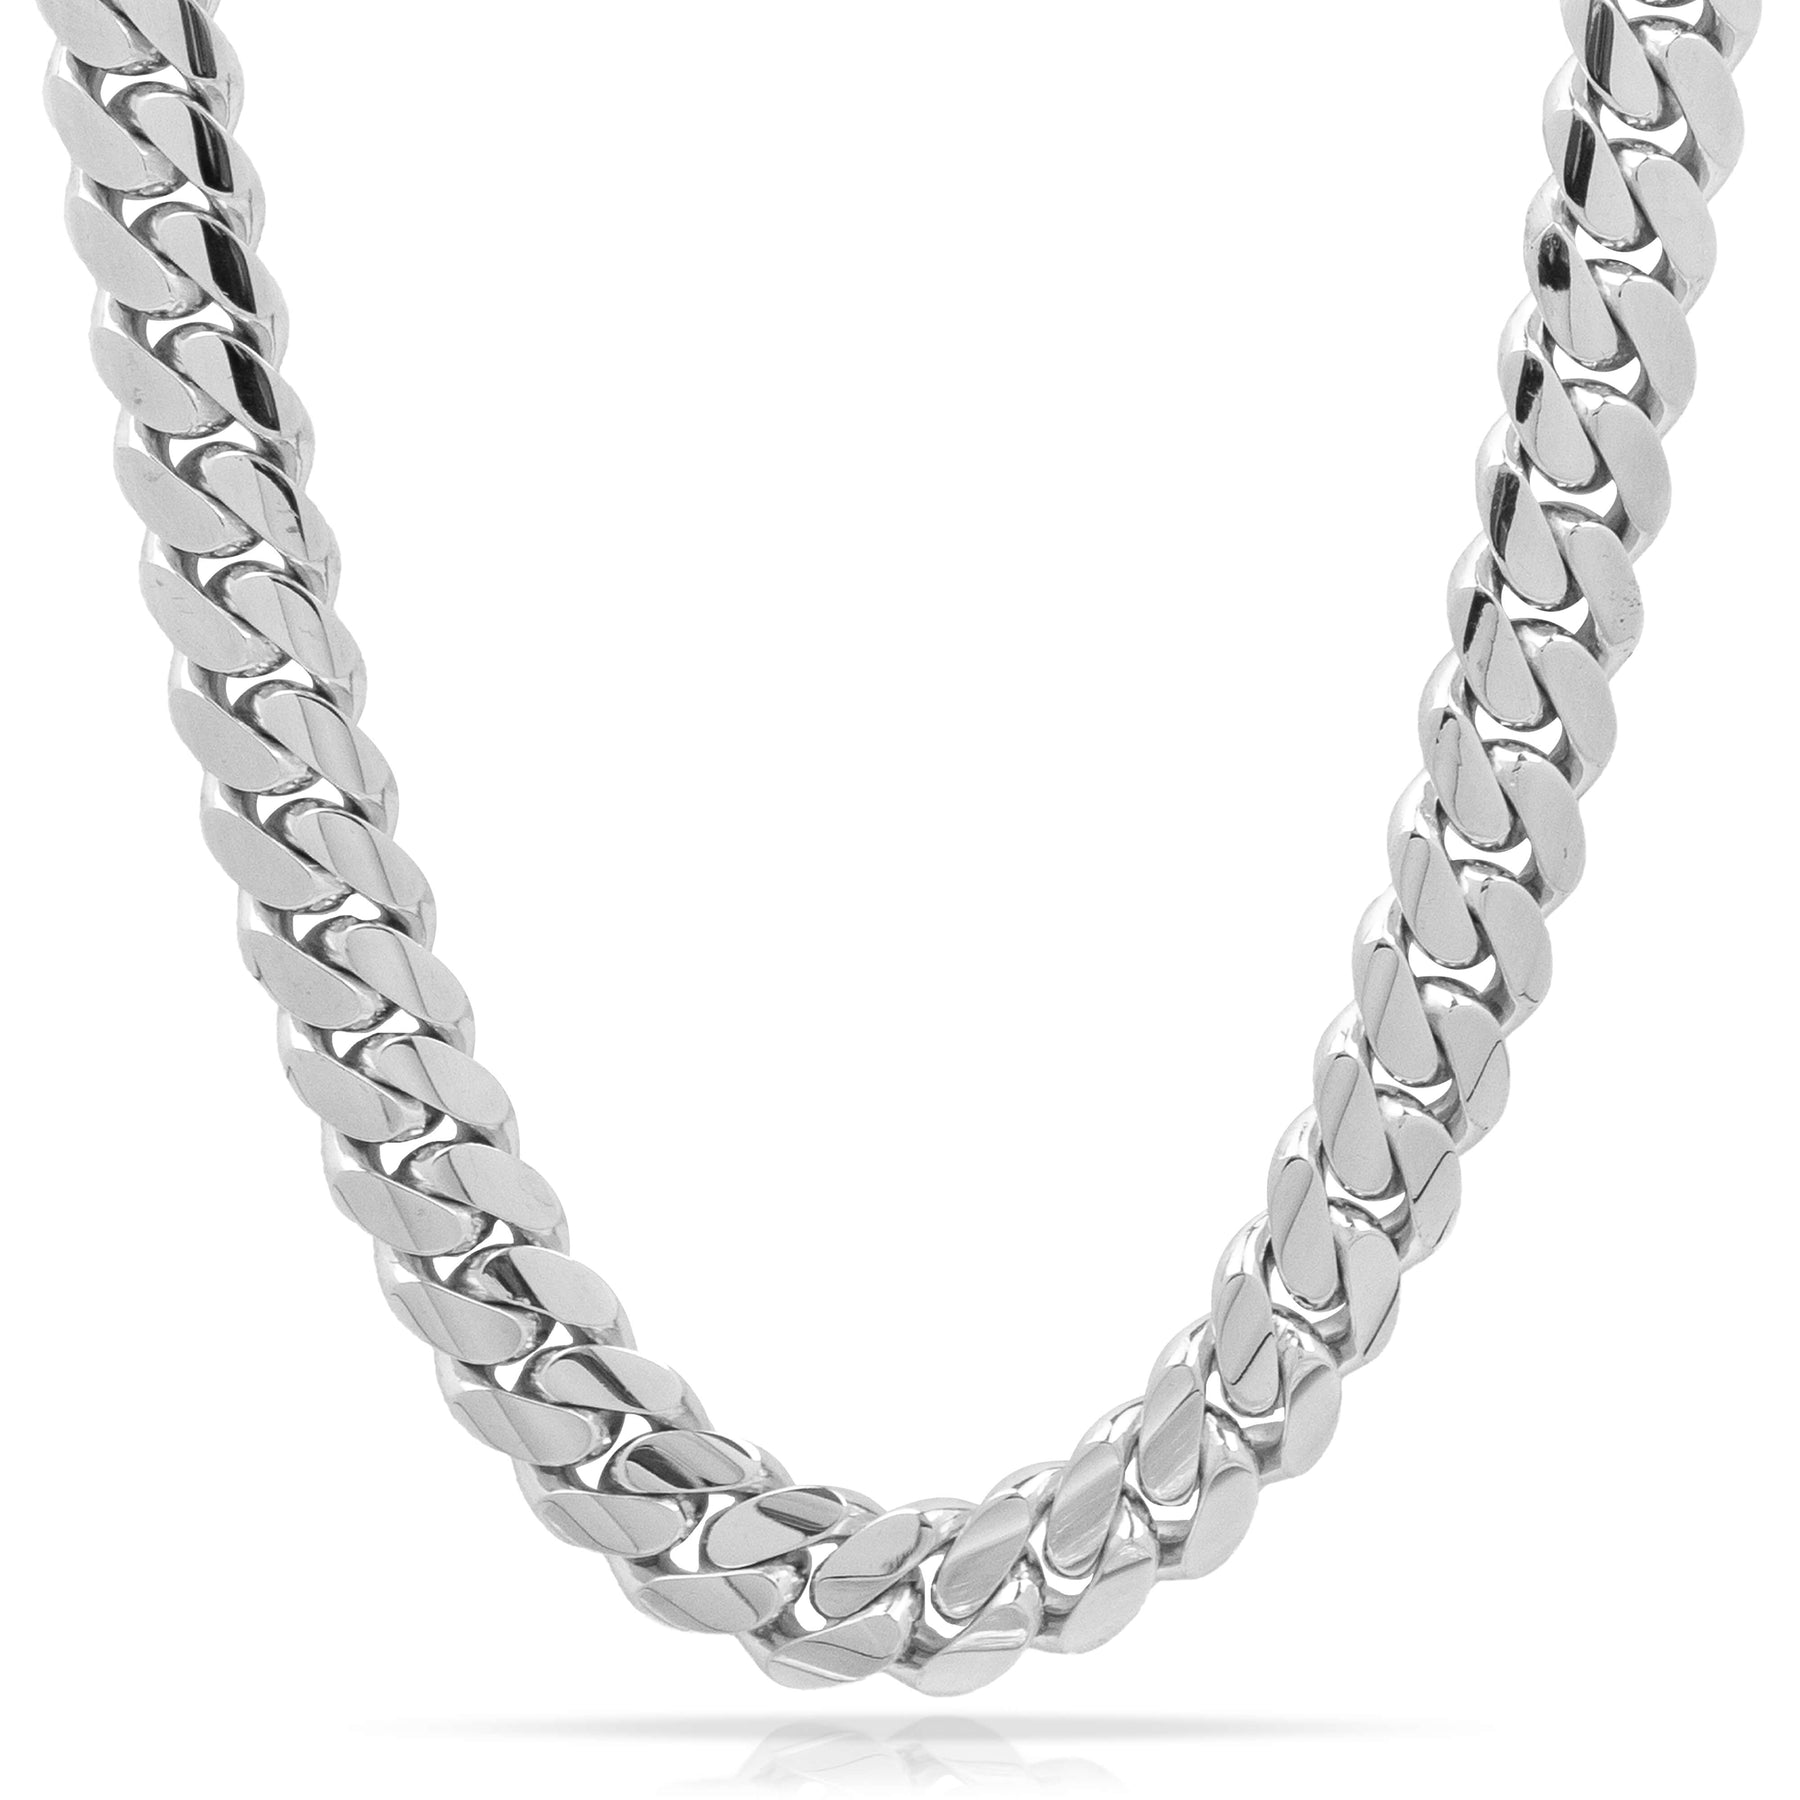 Gvlv SILVERPLATED WHITEMETAL HANDMADE NECKCHAIN FOR MEN AND BOYS 999 Silver  Plated Metal Chain Price in India - Buy Gvlv SILVERPLATED WHITEMETAL  HANDMADE NECKCHAIN FOR MEN AND BOYS 999 Silver Plated Metal